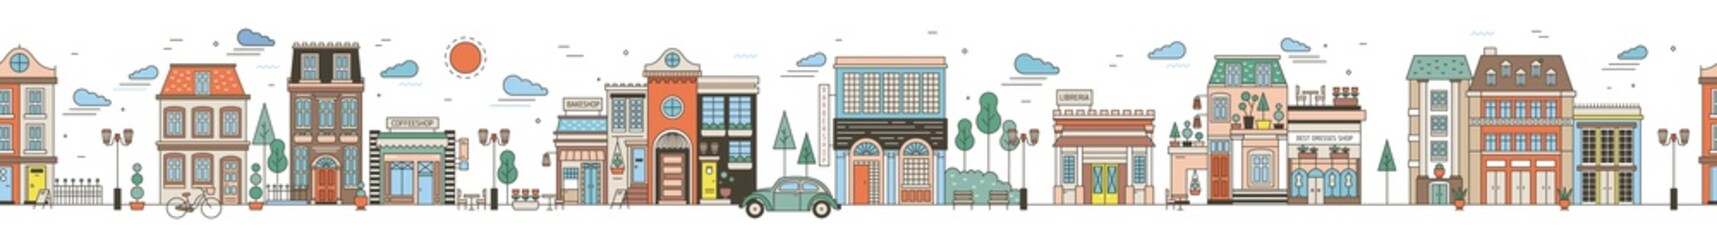 Fototapete - Seamless horizontal urban landscape with city street. Cityscape with beautiful buildings, residential houses, shops, park, driving car. Modern colorful vector illustration in line art style.